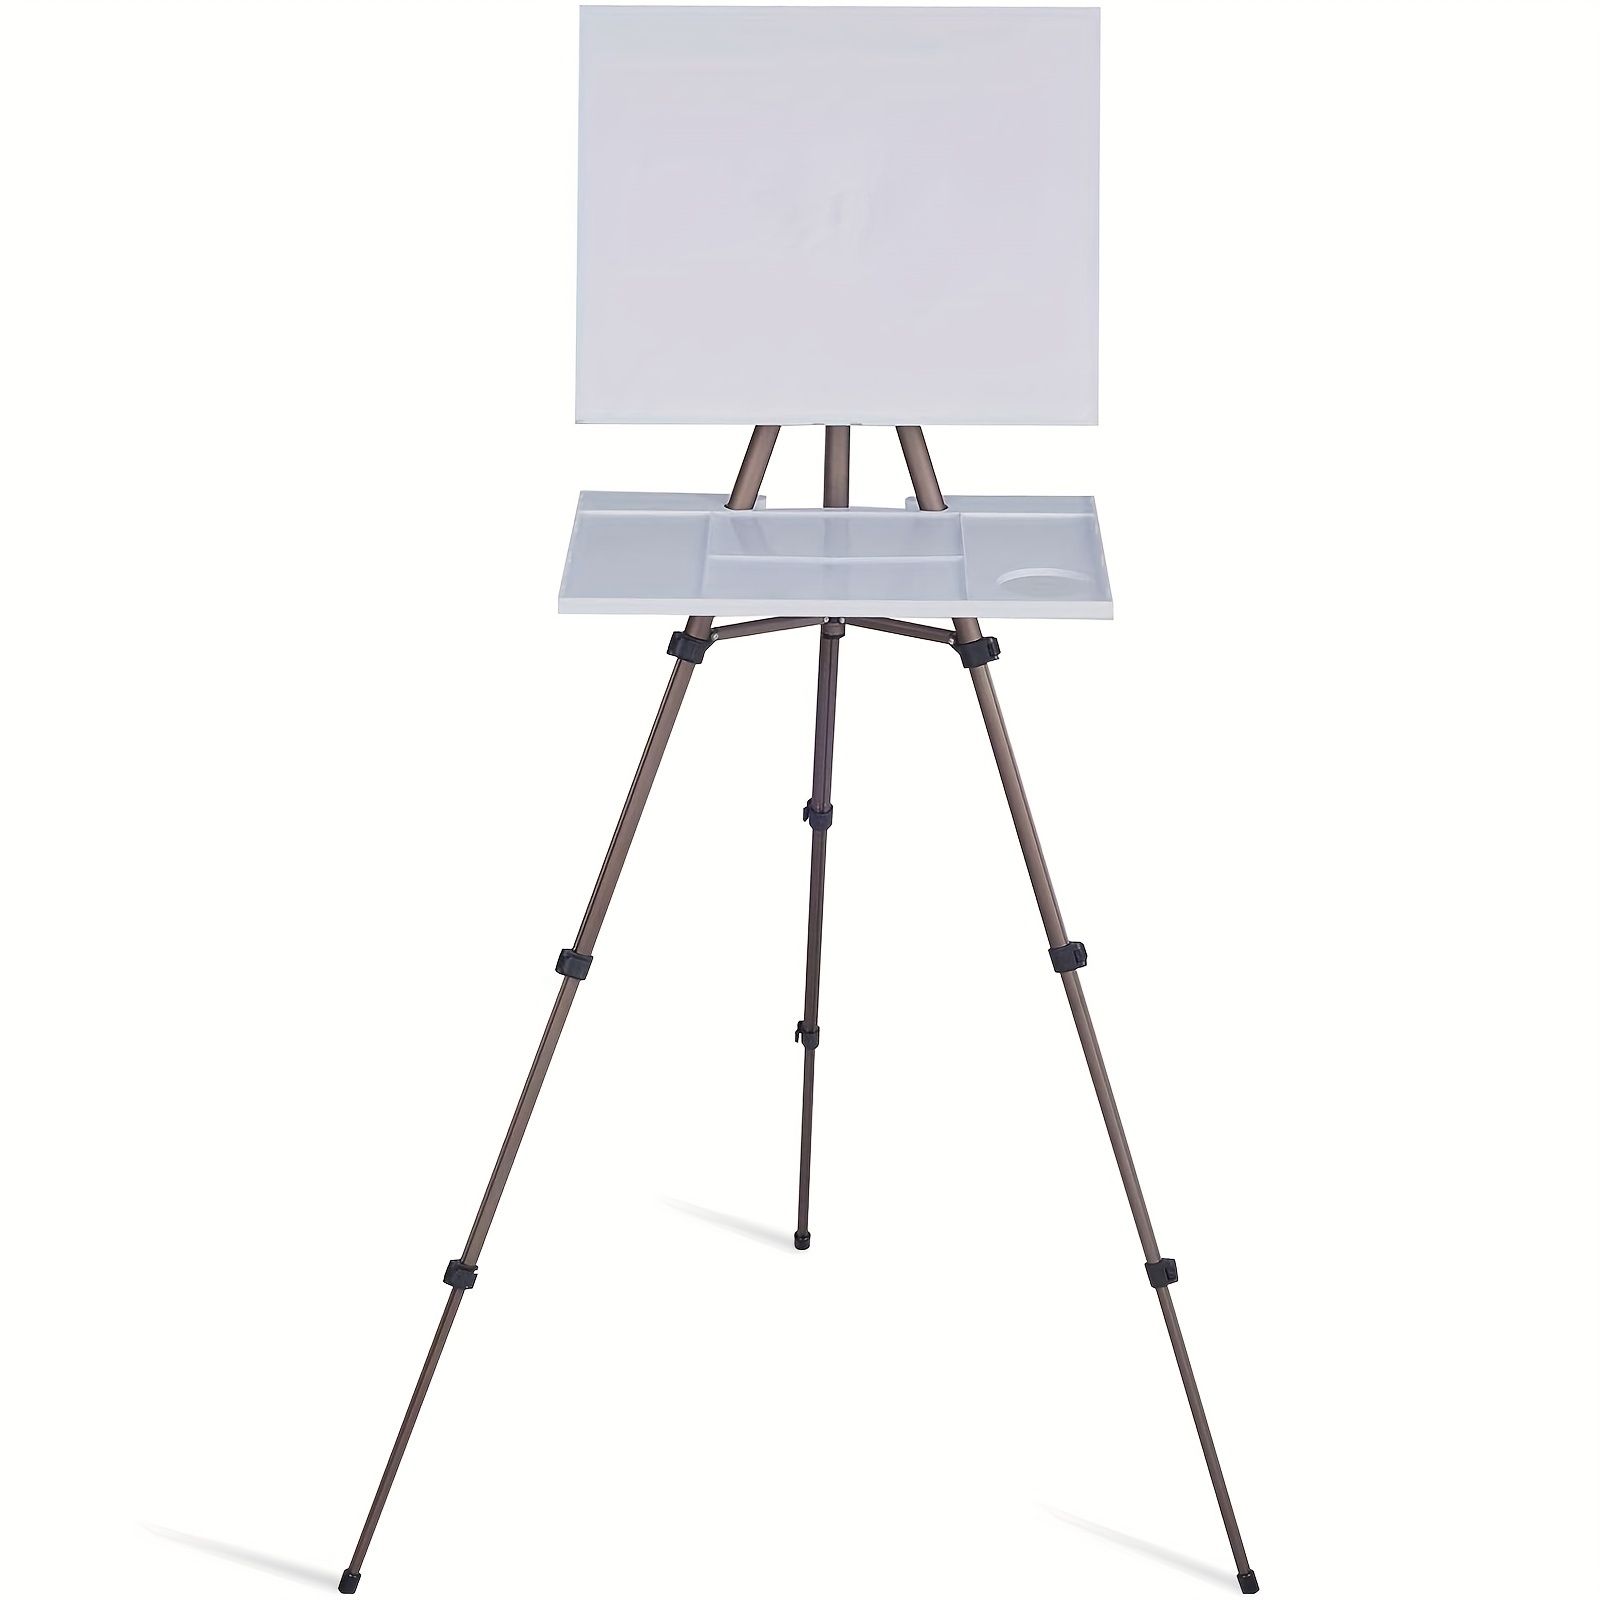 meeden artist watercolor field easel portable easel lightweight field easel 17 to 65 inch for watercolors sturdy tripod for tabletop floor painting drawing and display